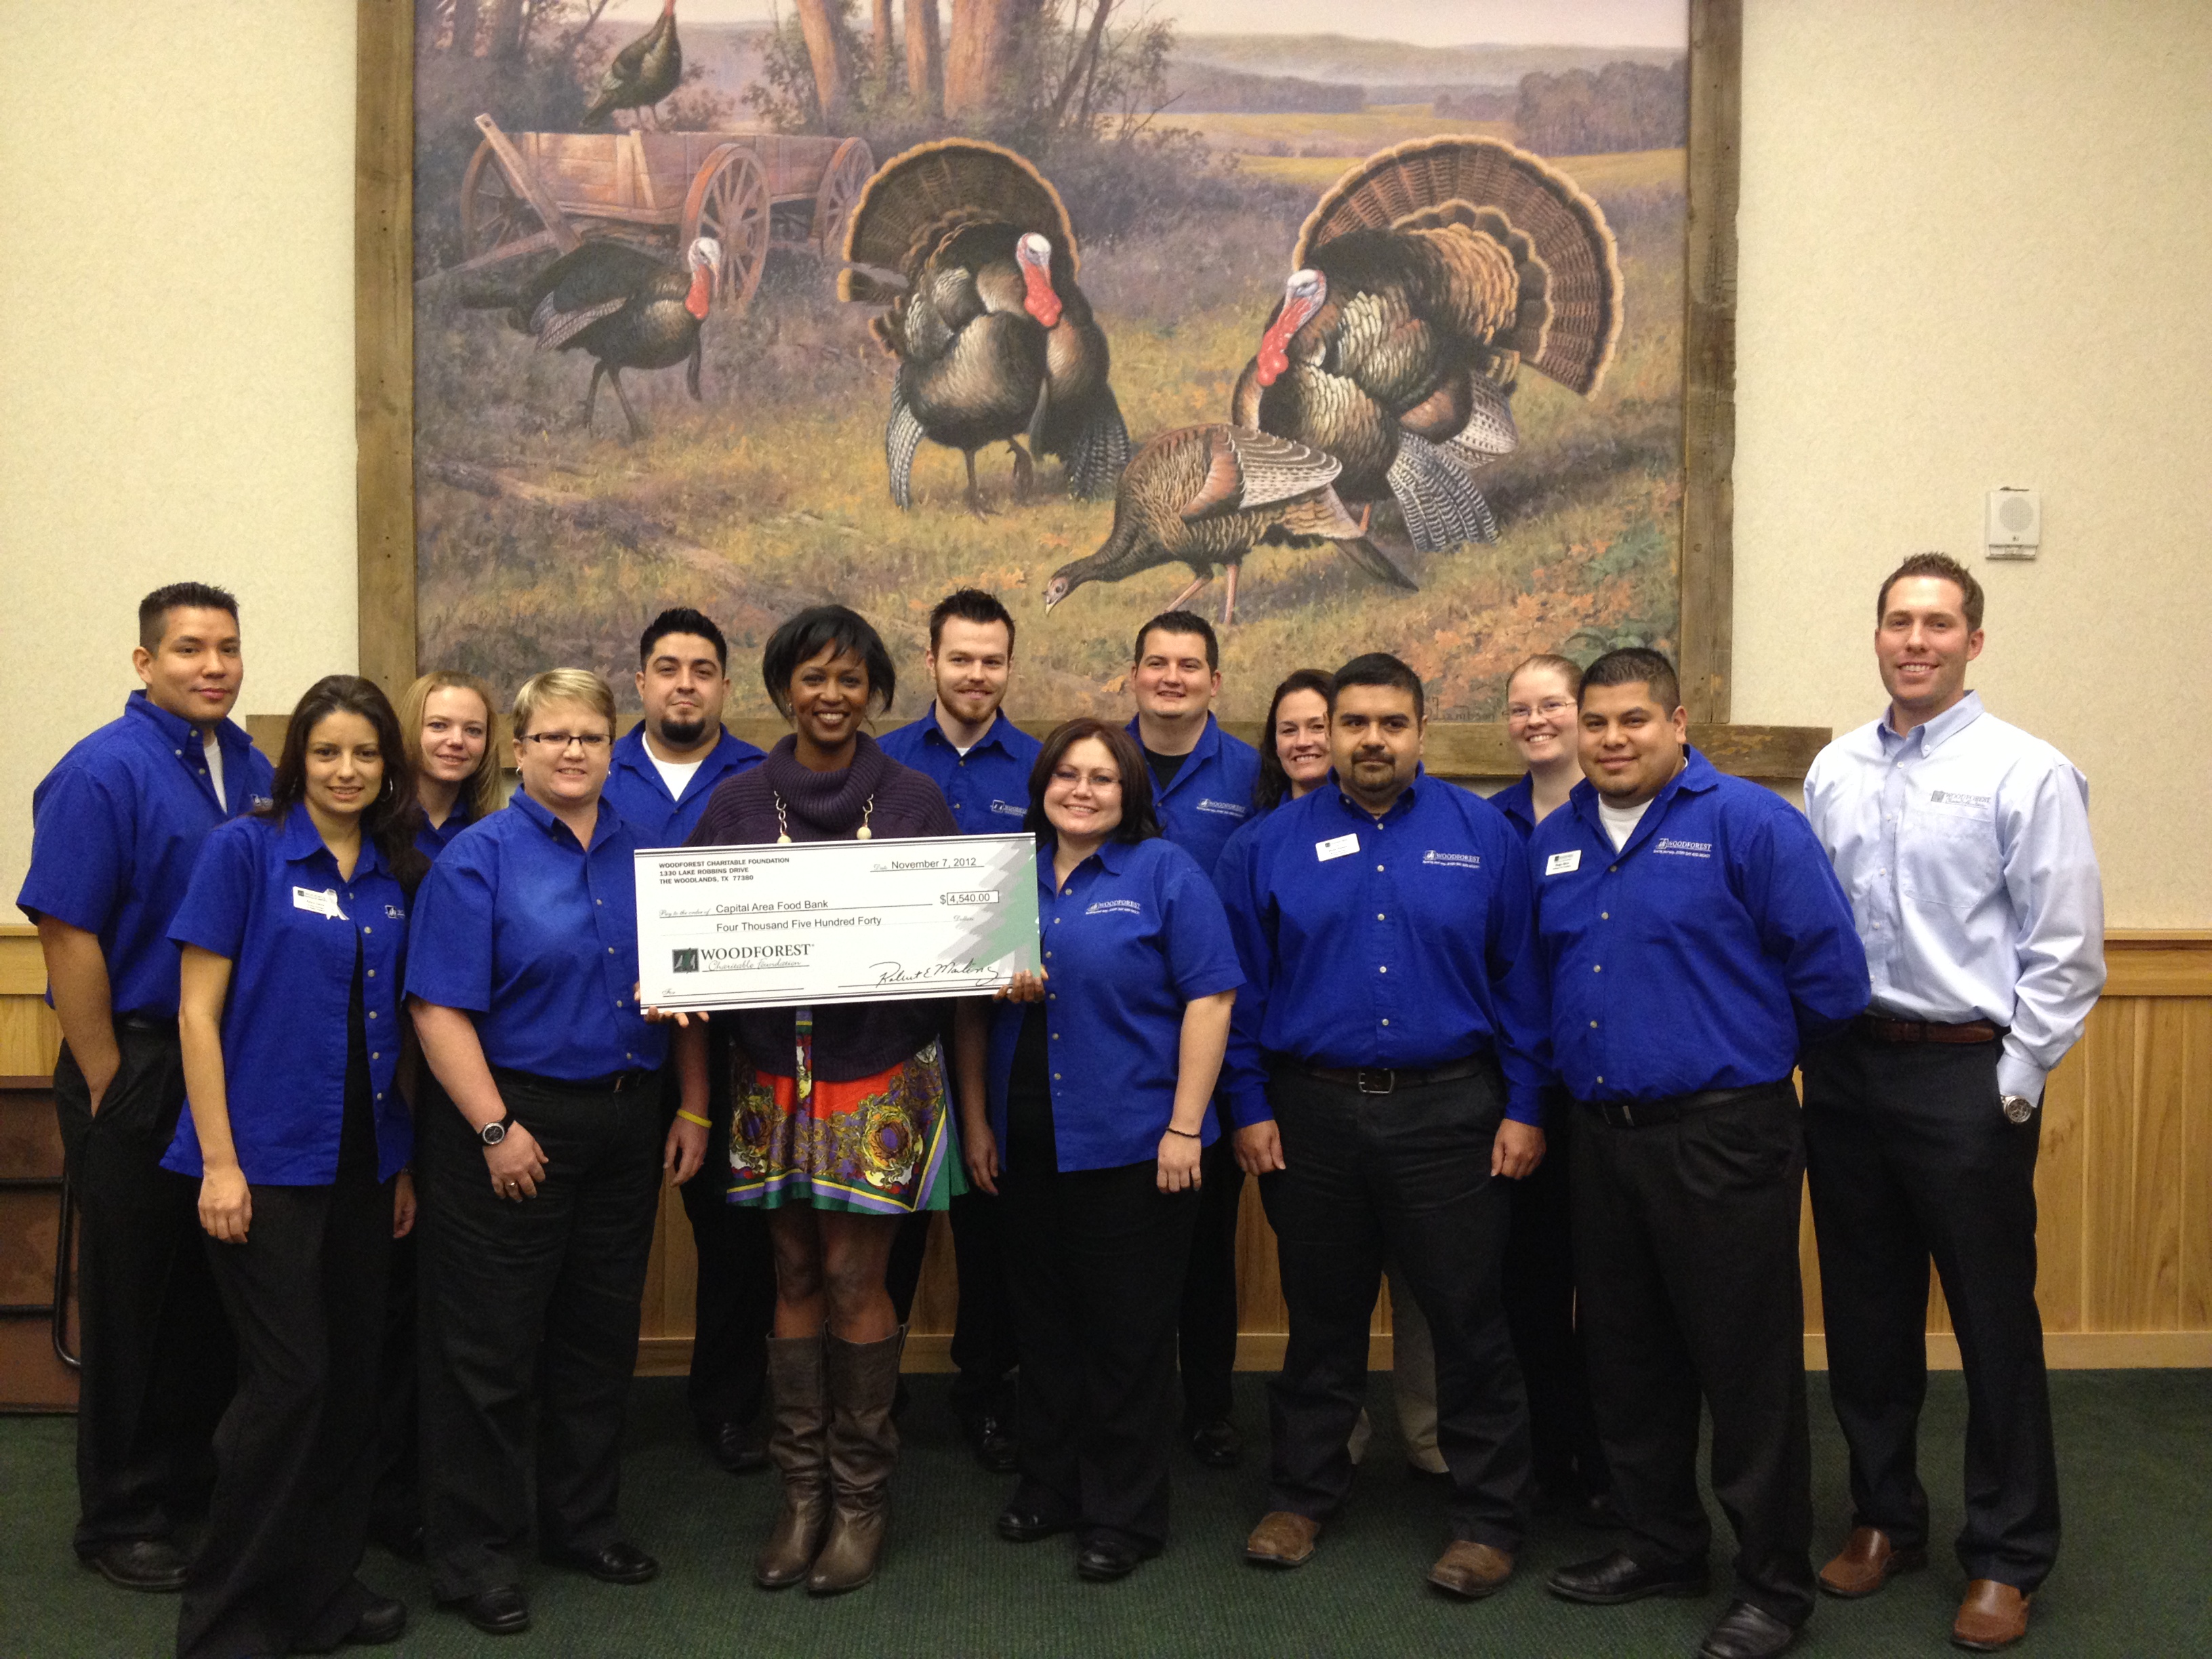 Capital Area Food Bank of Texas receives $4,540 donation from Woodforest Charitable Foundation.